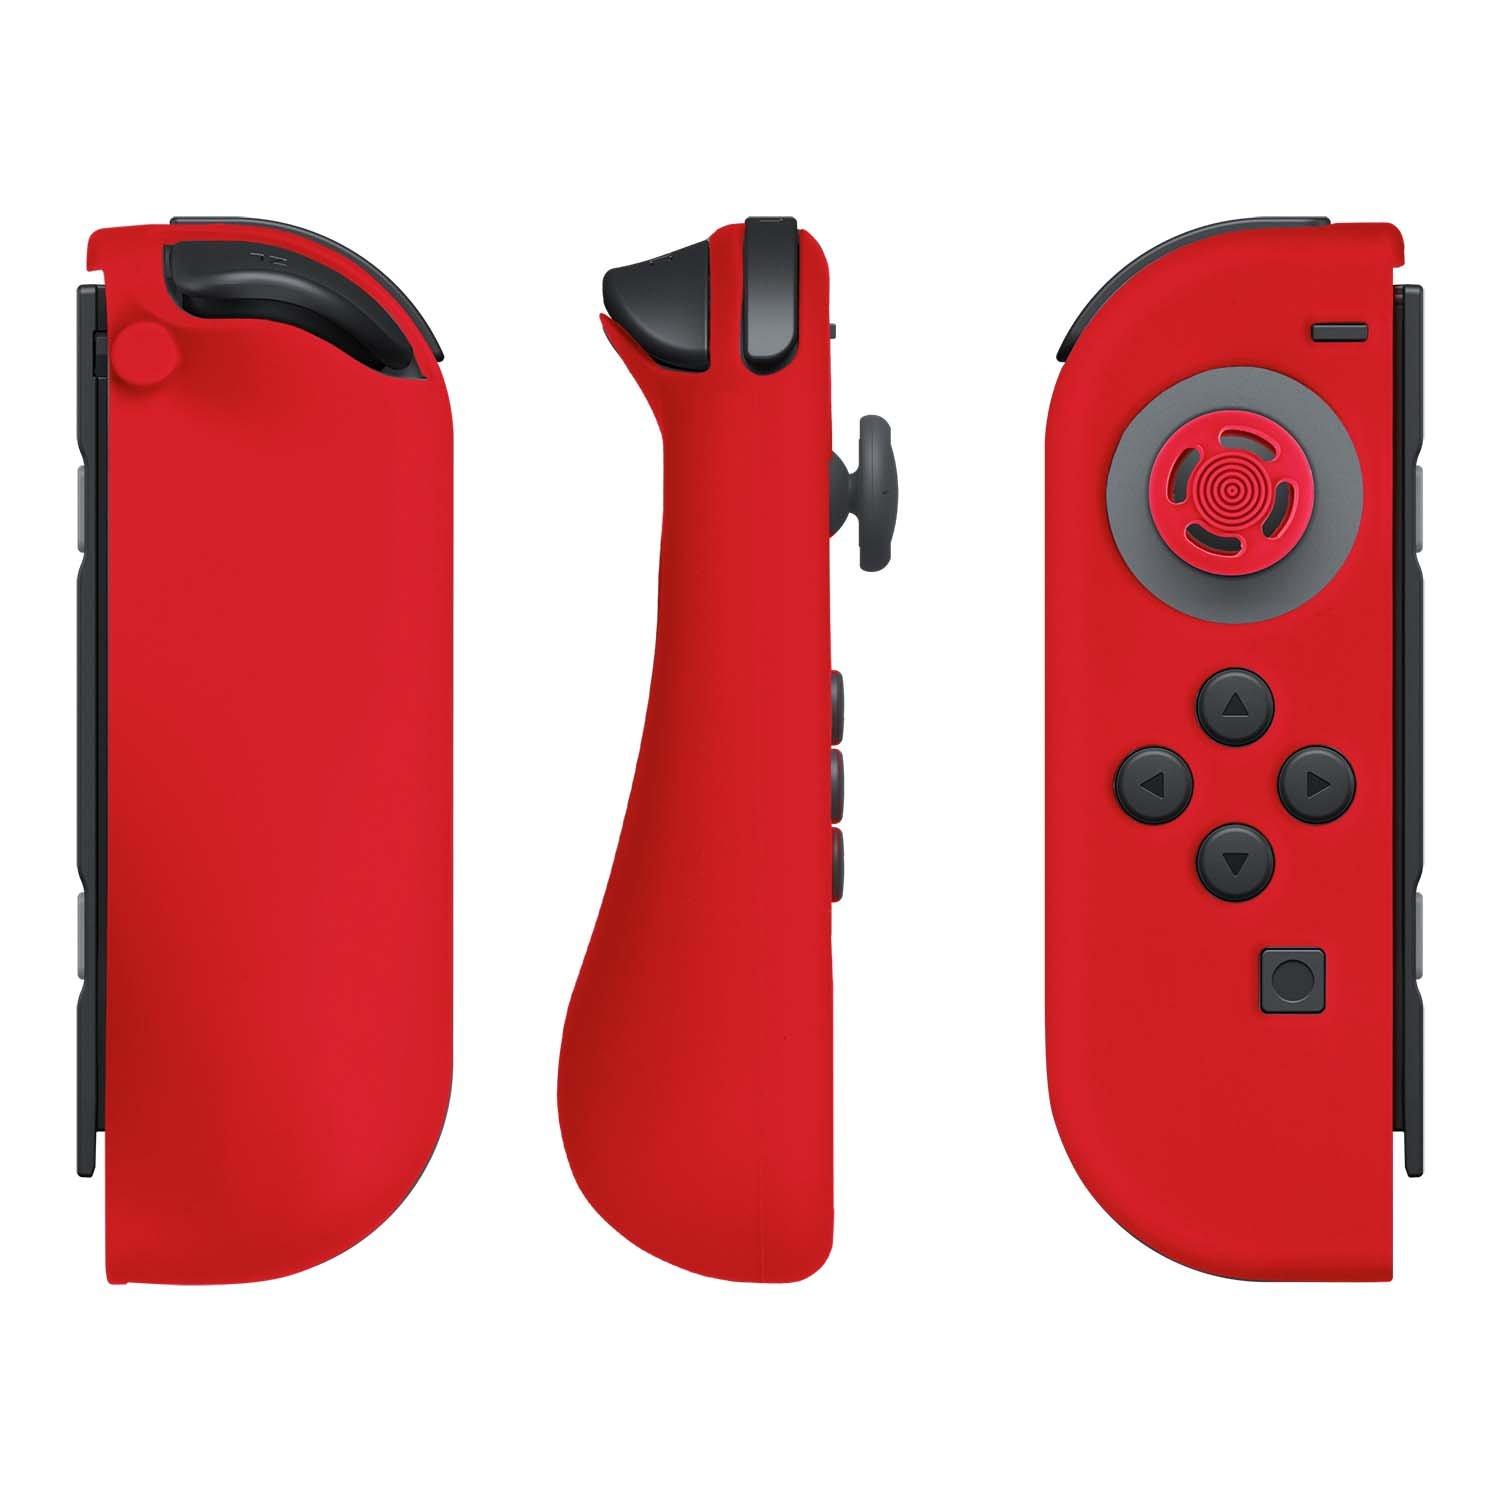 Super Mario Holiday Accessory Bundle for Nintendo Switch Only at GameStop